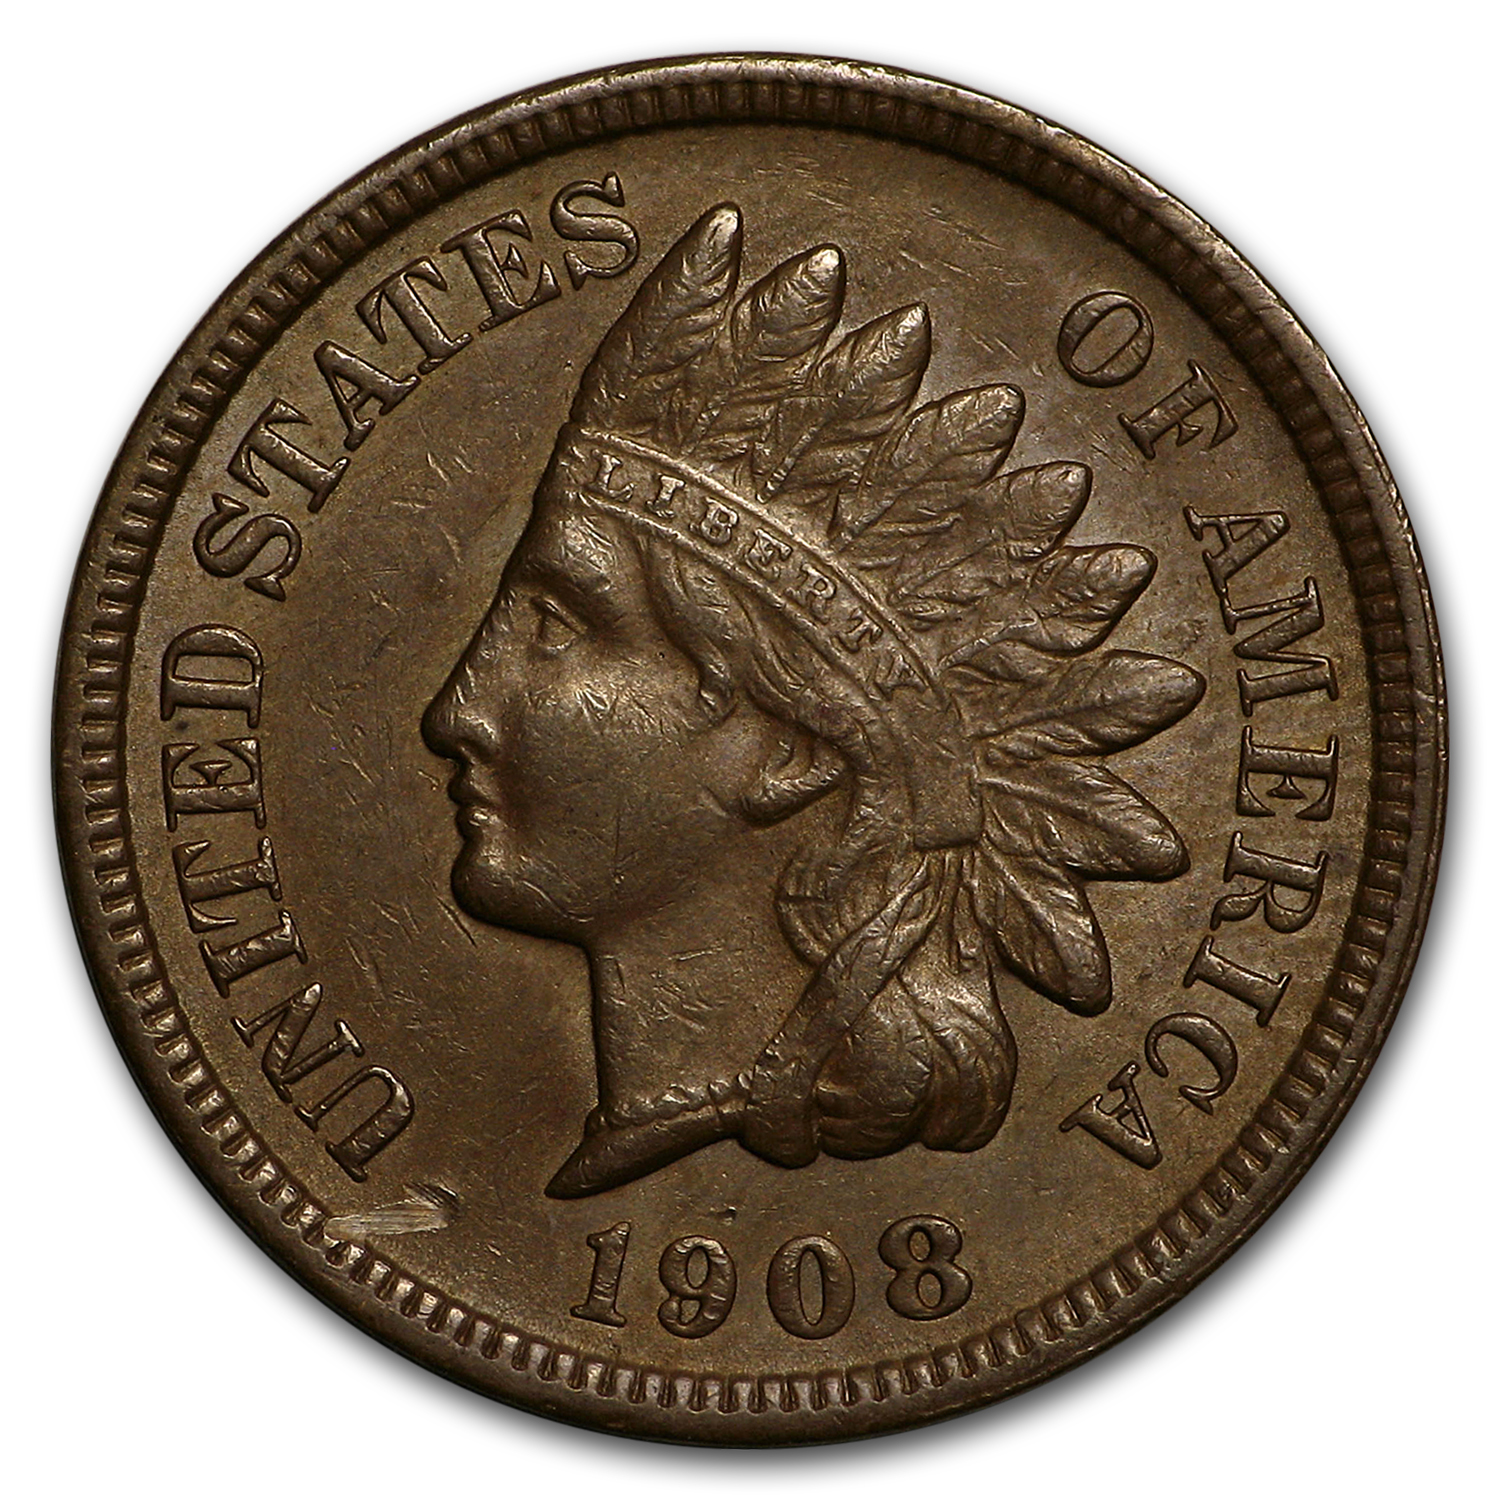 Buy 1908-S Indian Head Cent XF